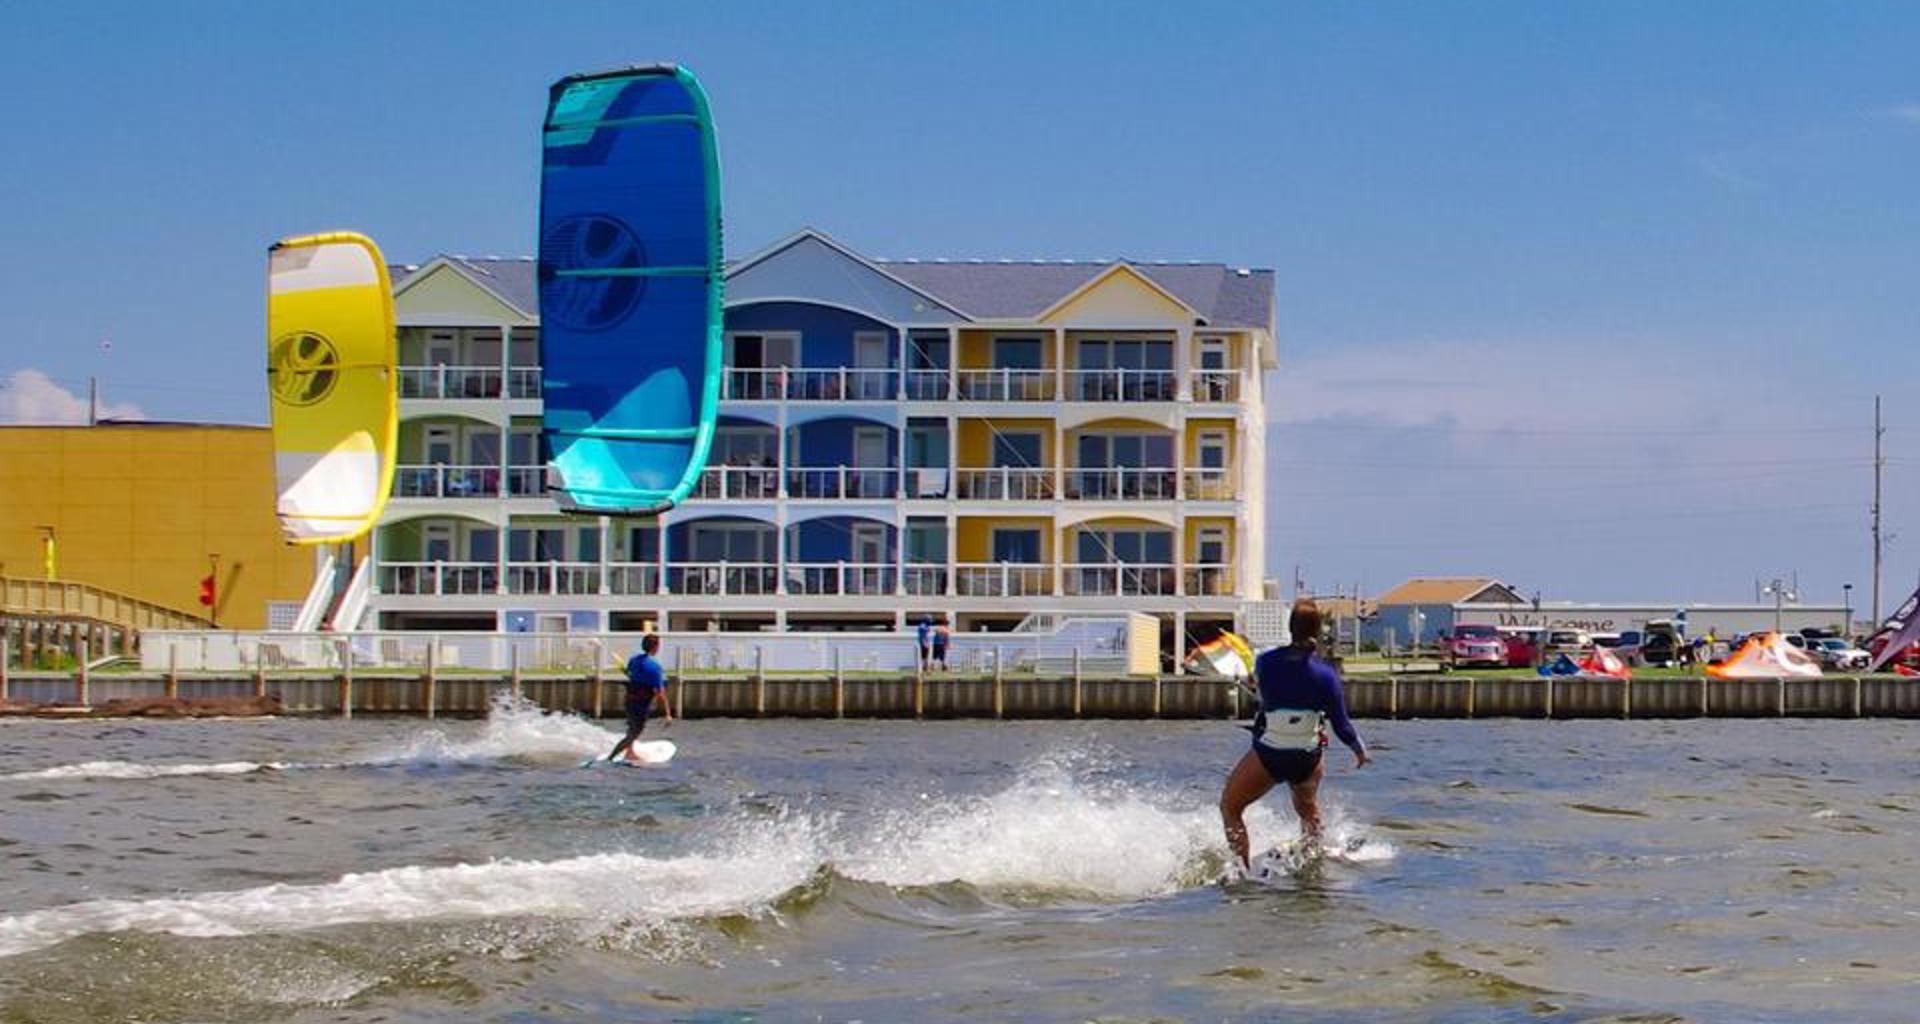 2 kiteboarders from behind as their yellow & blue kites cross in front of an colorful soundfront condo building in Rodanthe